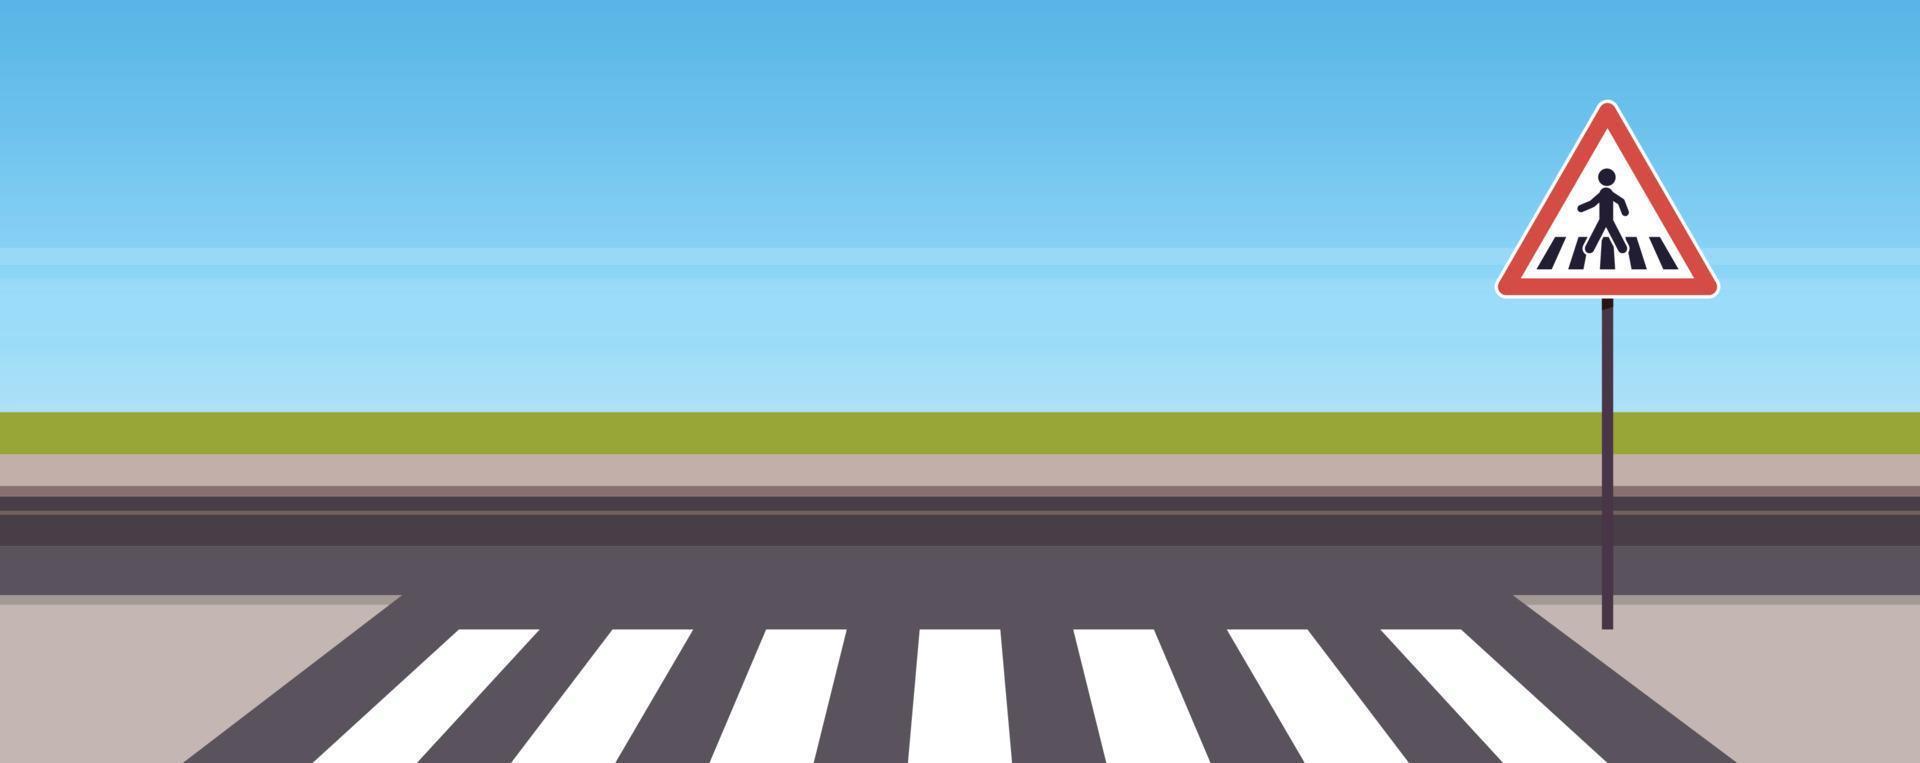 Traffic signs on city road and crosswalk concept flat vector illustration.